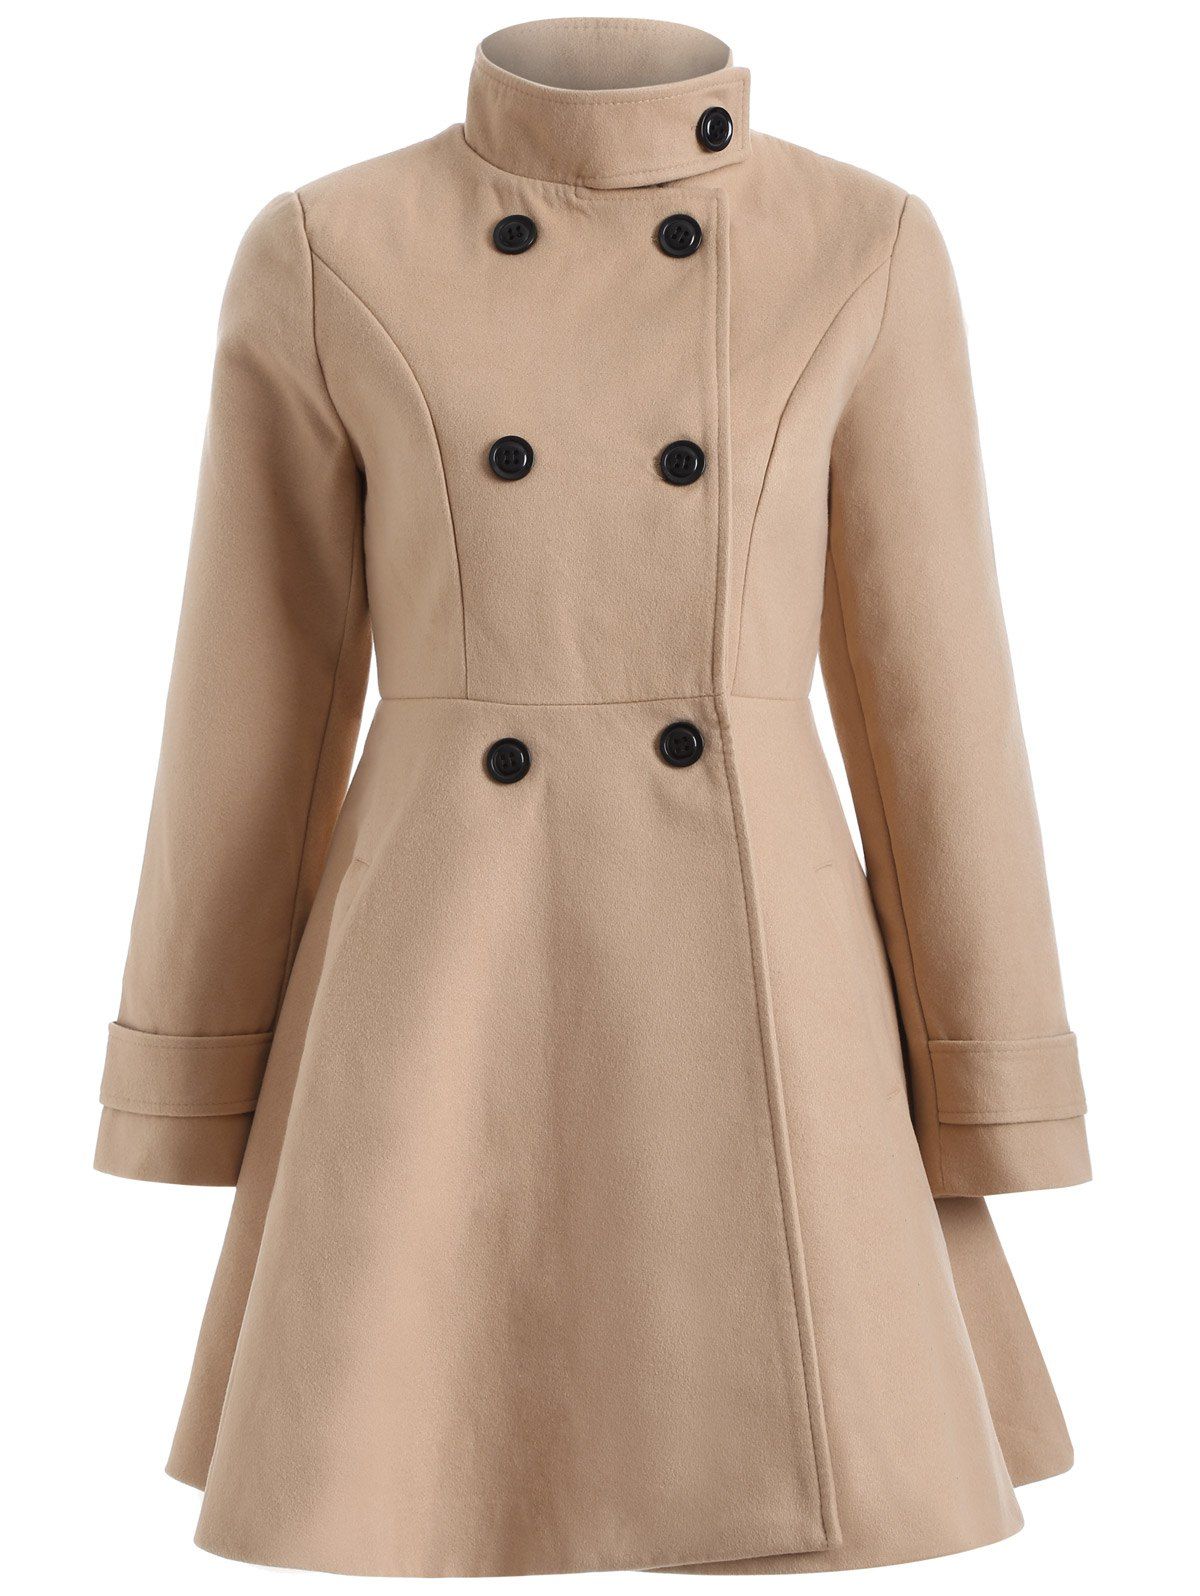 [82% OFF] Warm Double-Breasted Felt Trench Coat | Rosegal